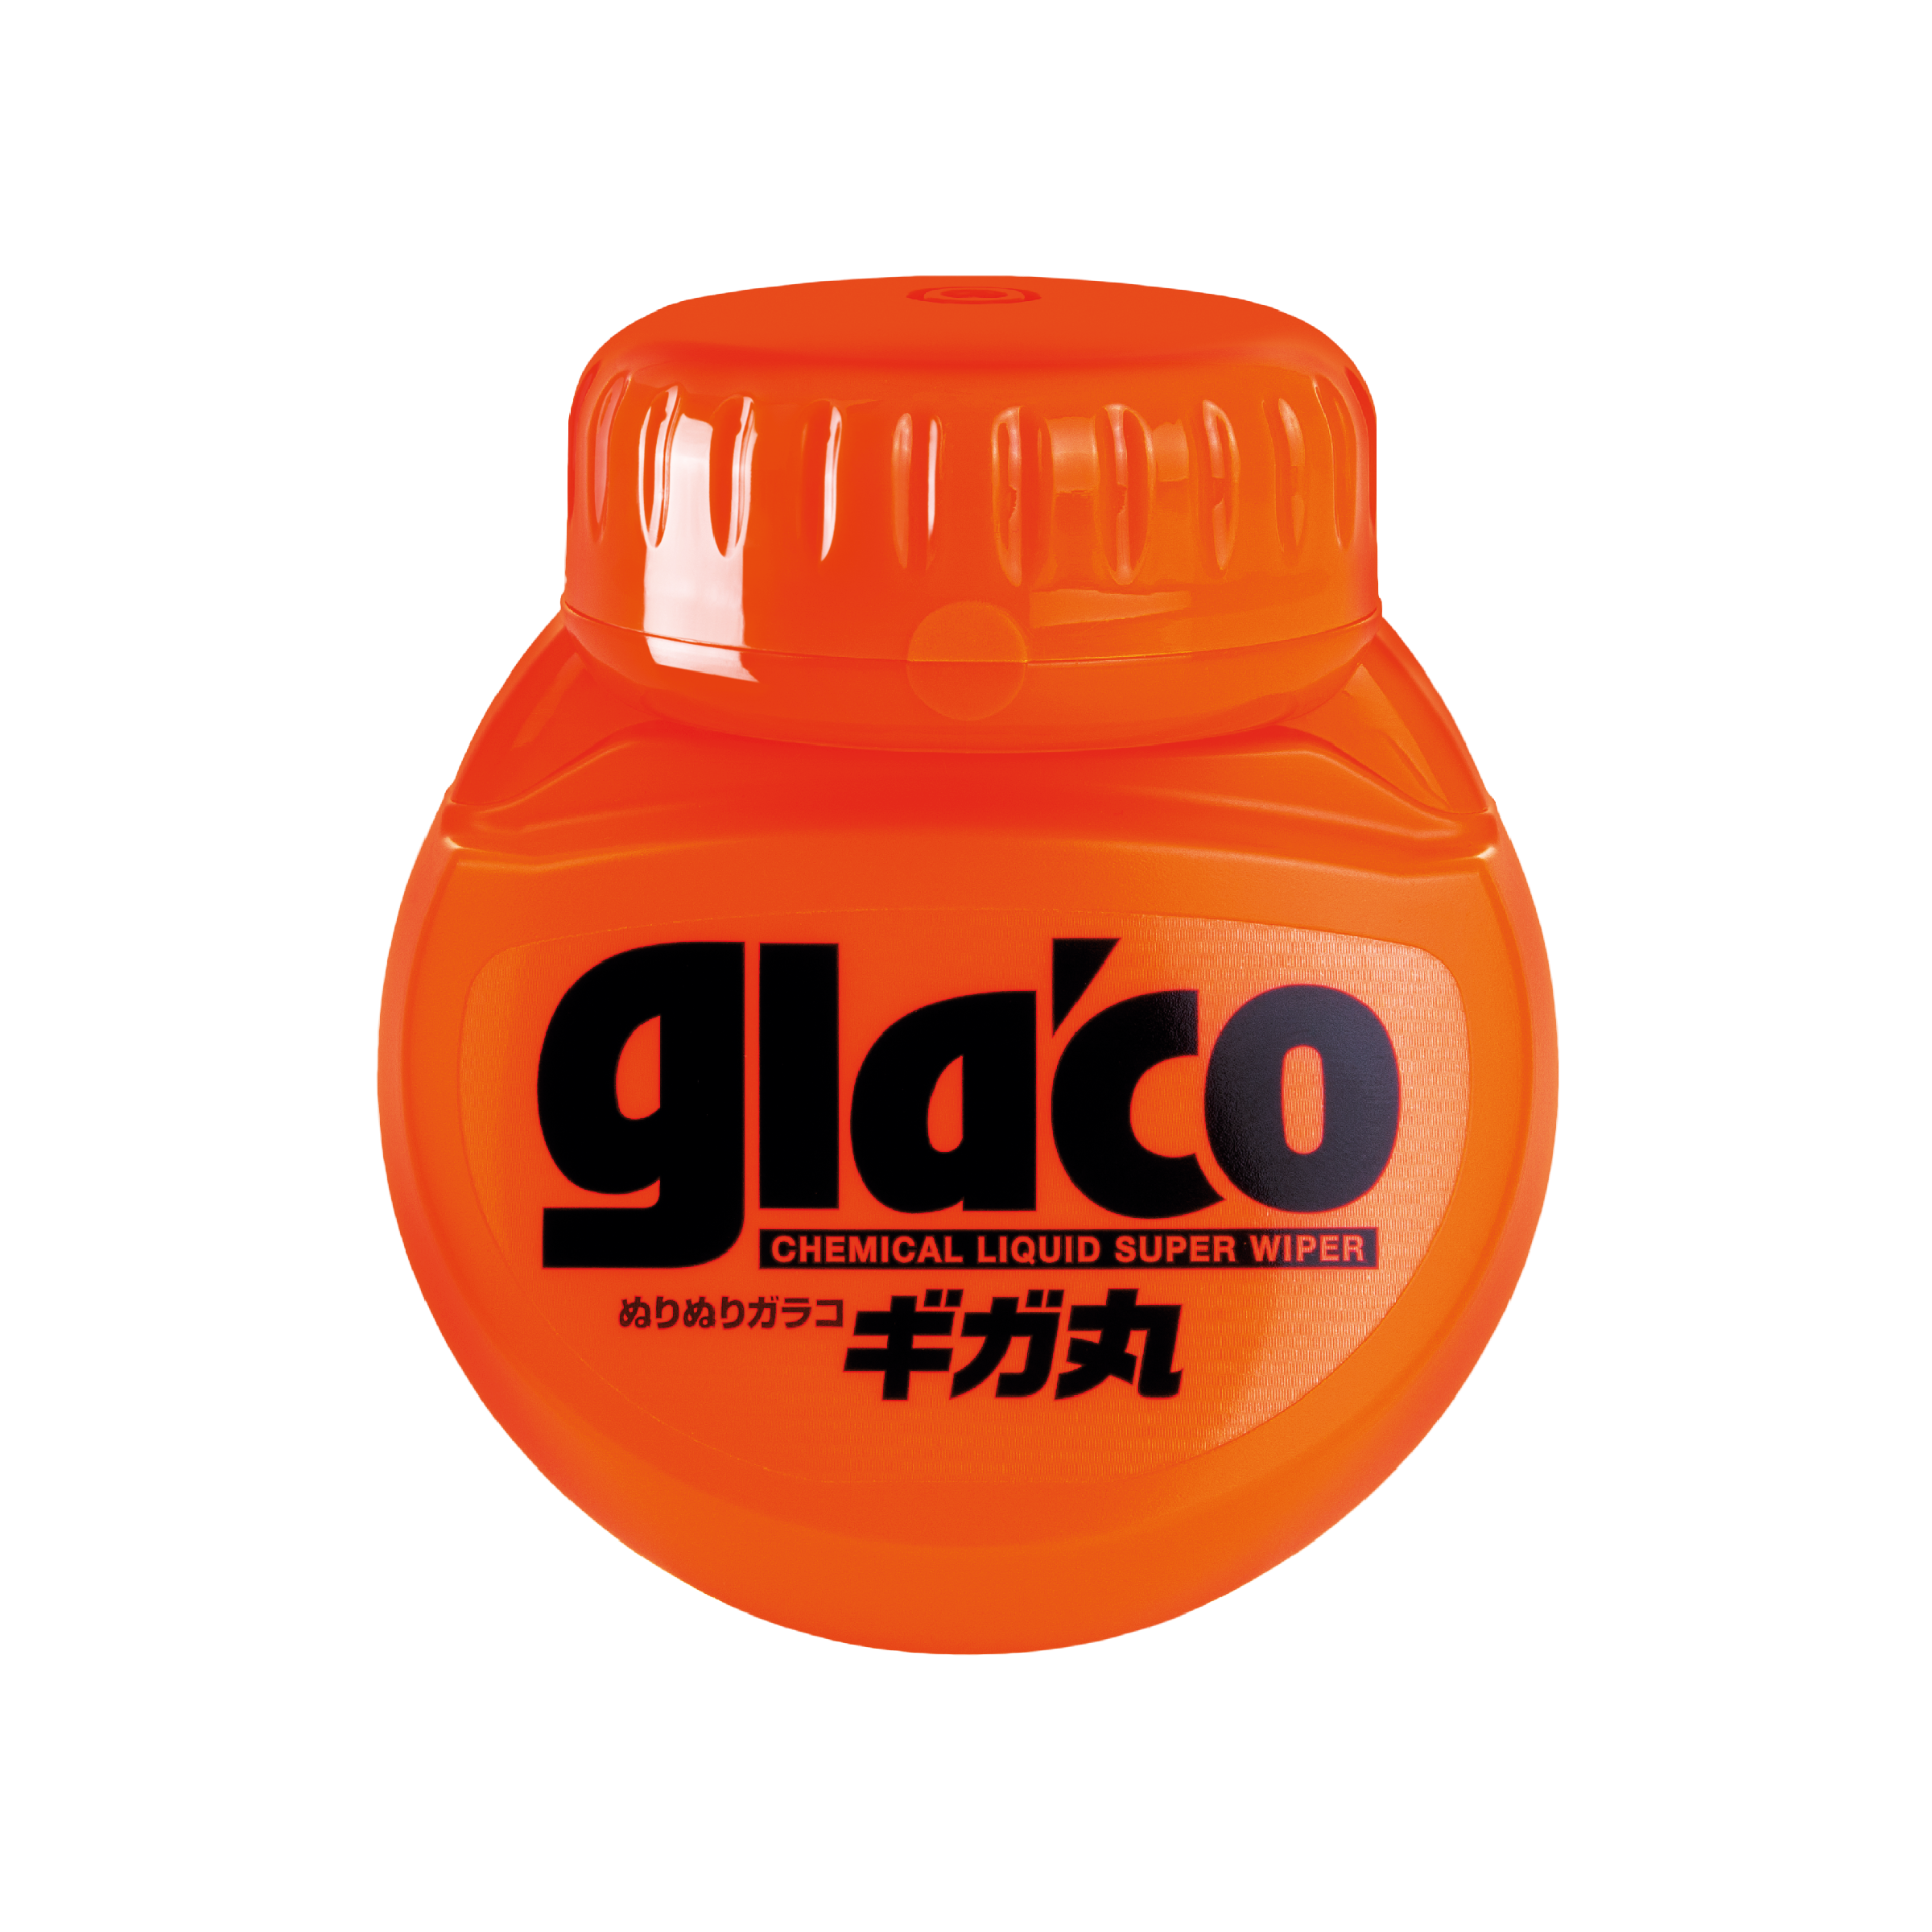 Soft99 Glaco hydrophobic coating - how it really works? 